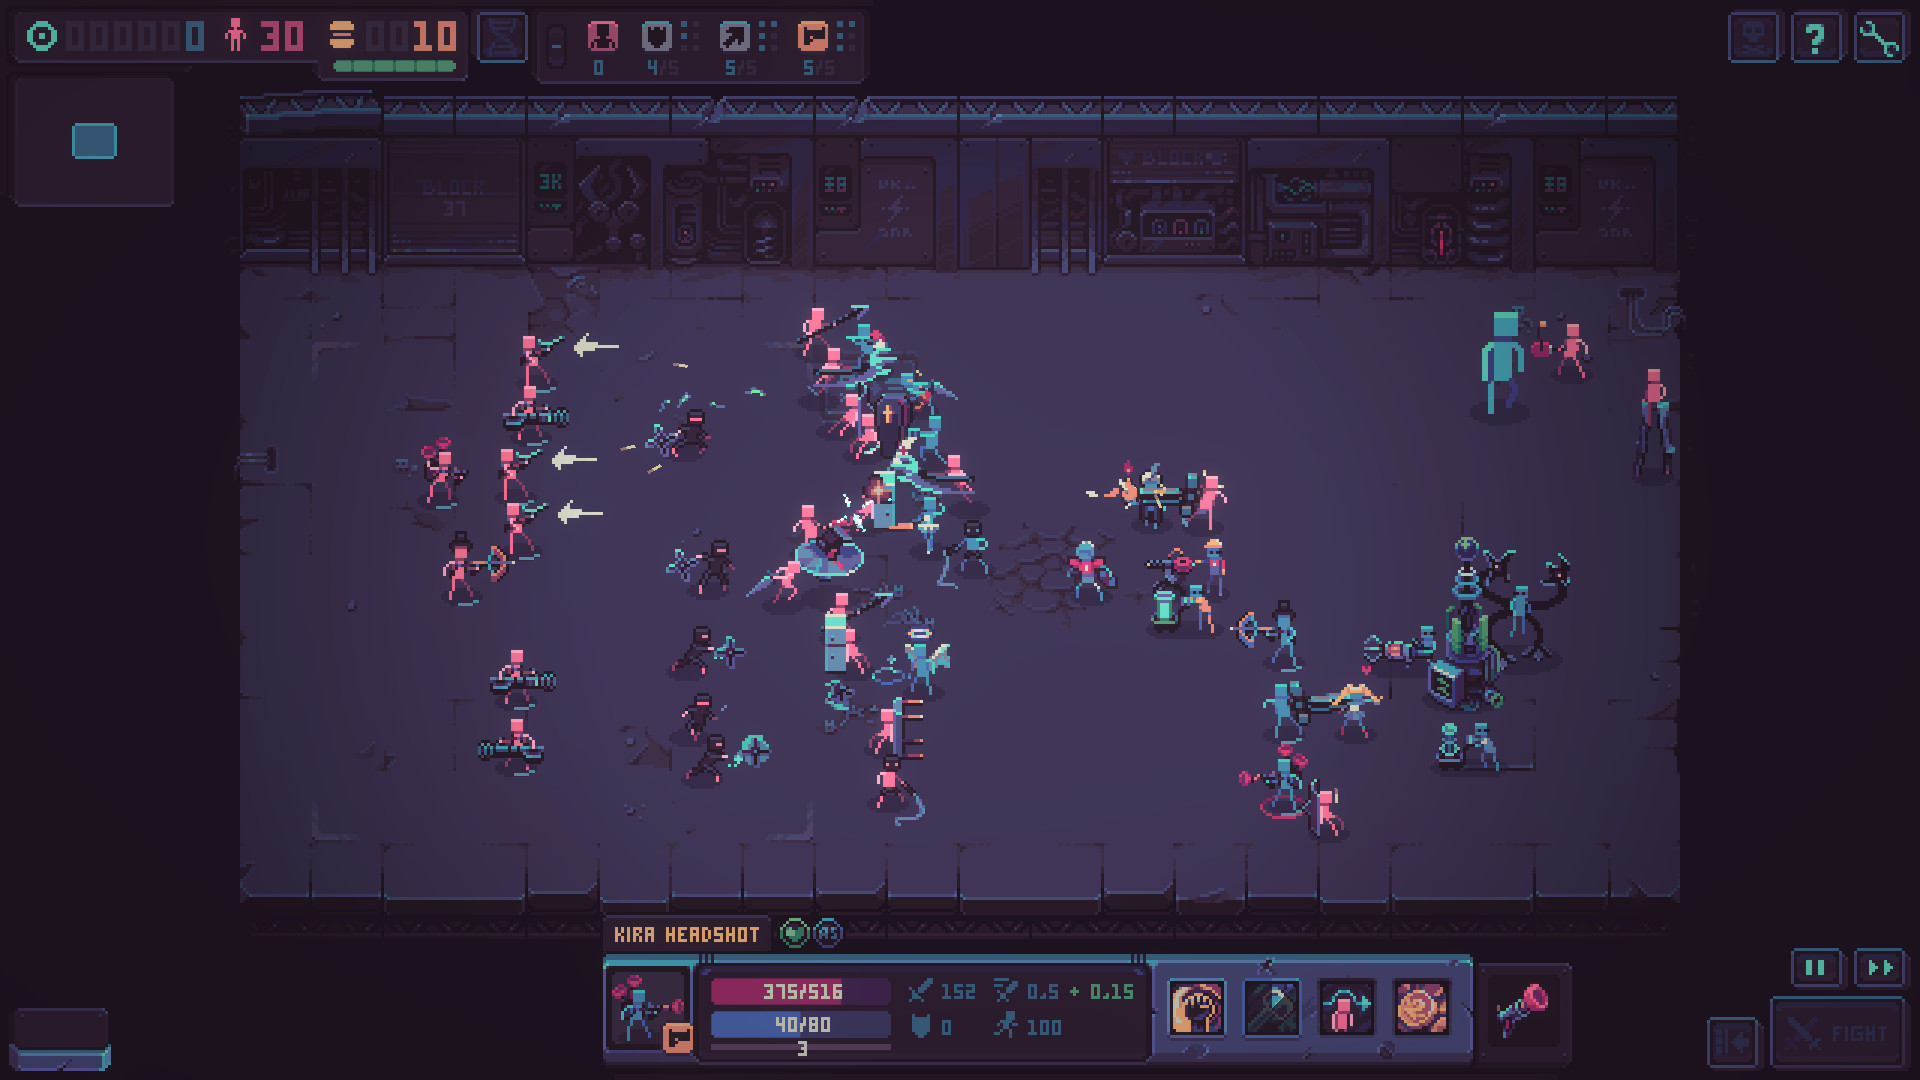 Despot's Game: Dystopian Army Builder Steam Altergift